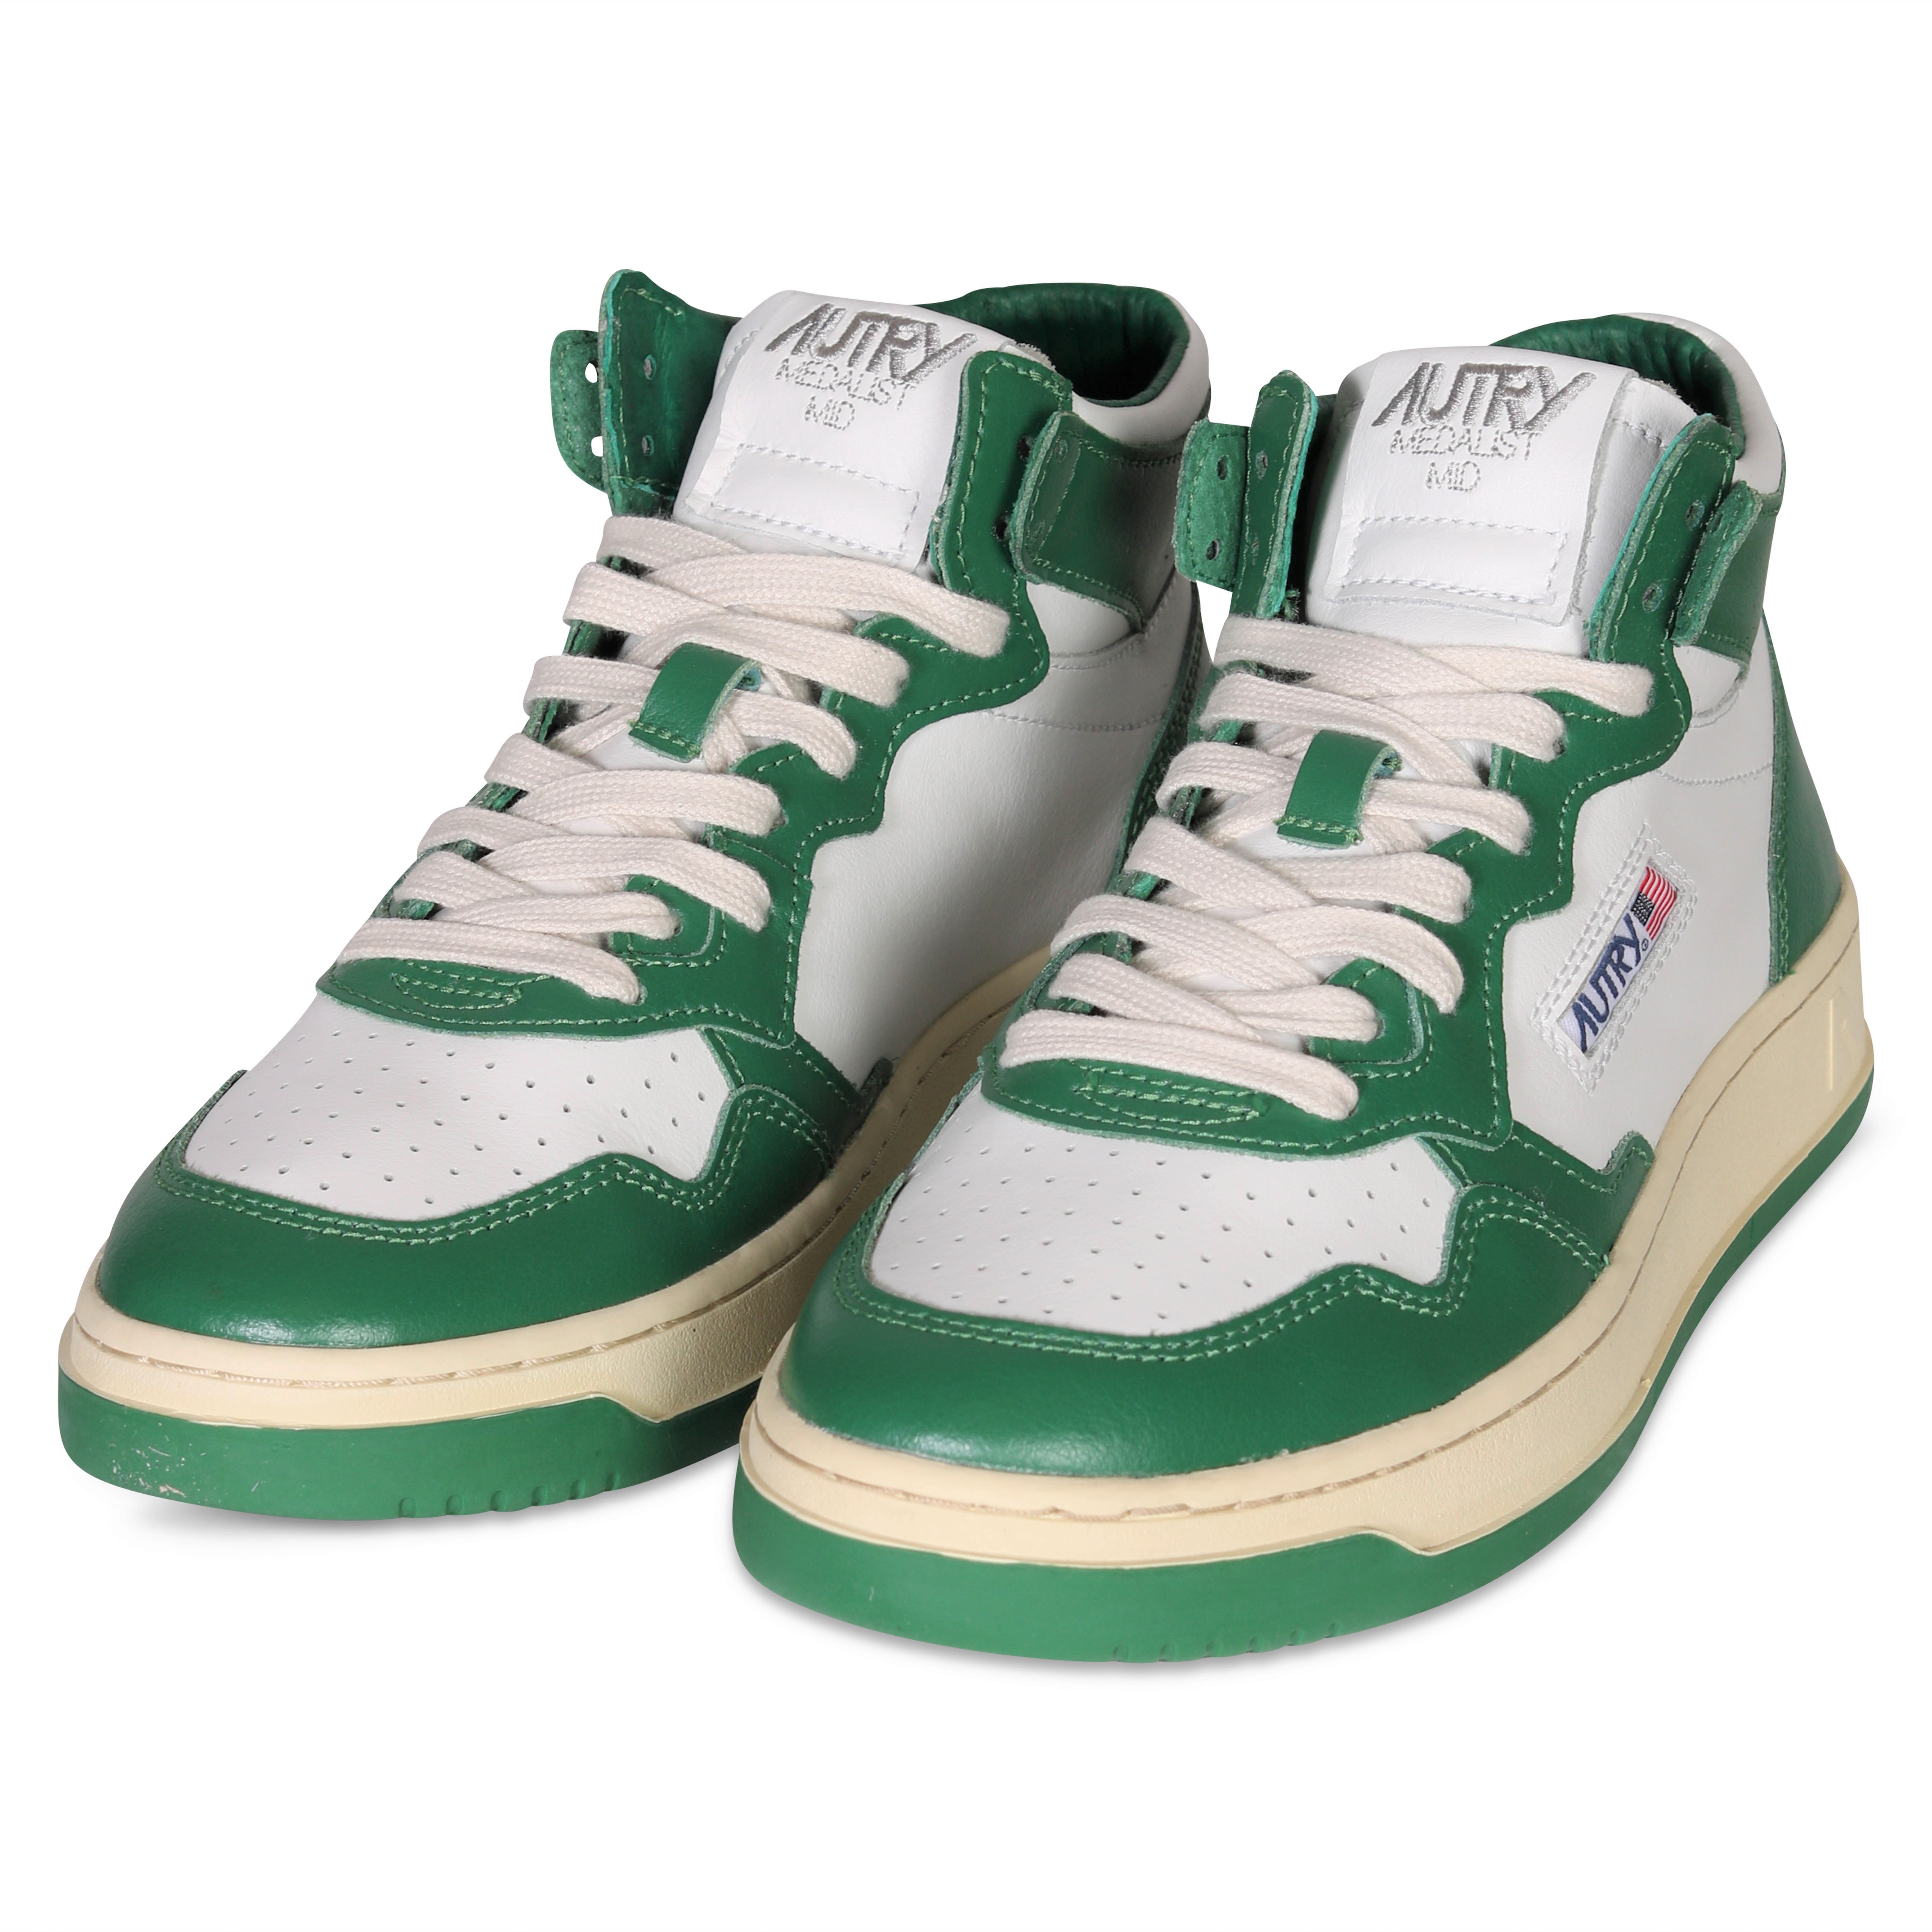 Autry Action Shoes Mid Sneaker White/Green